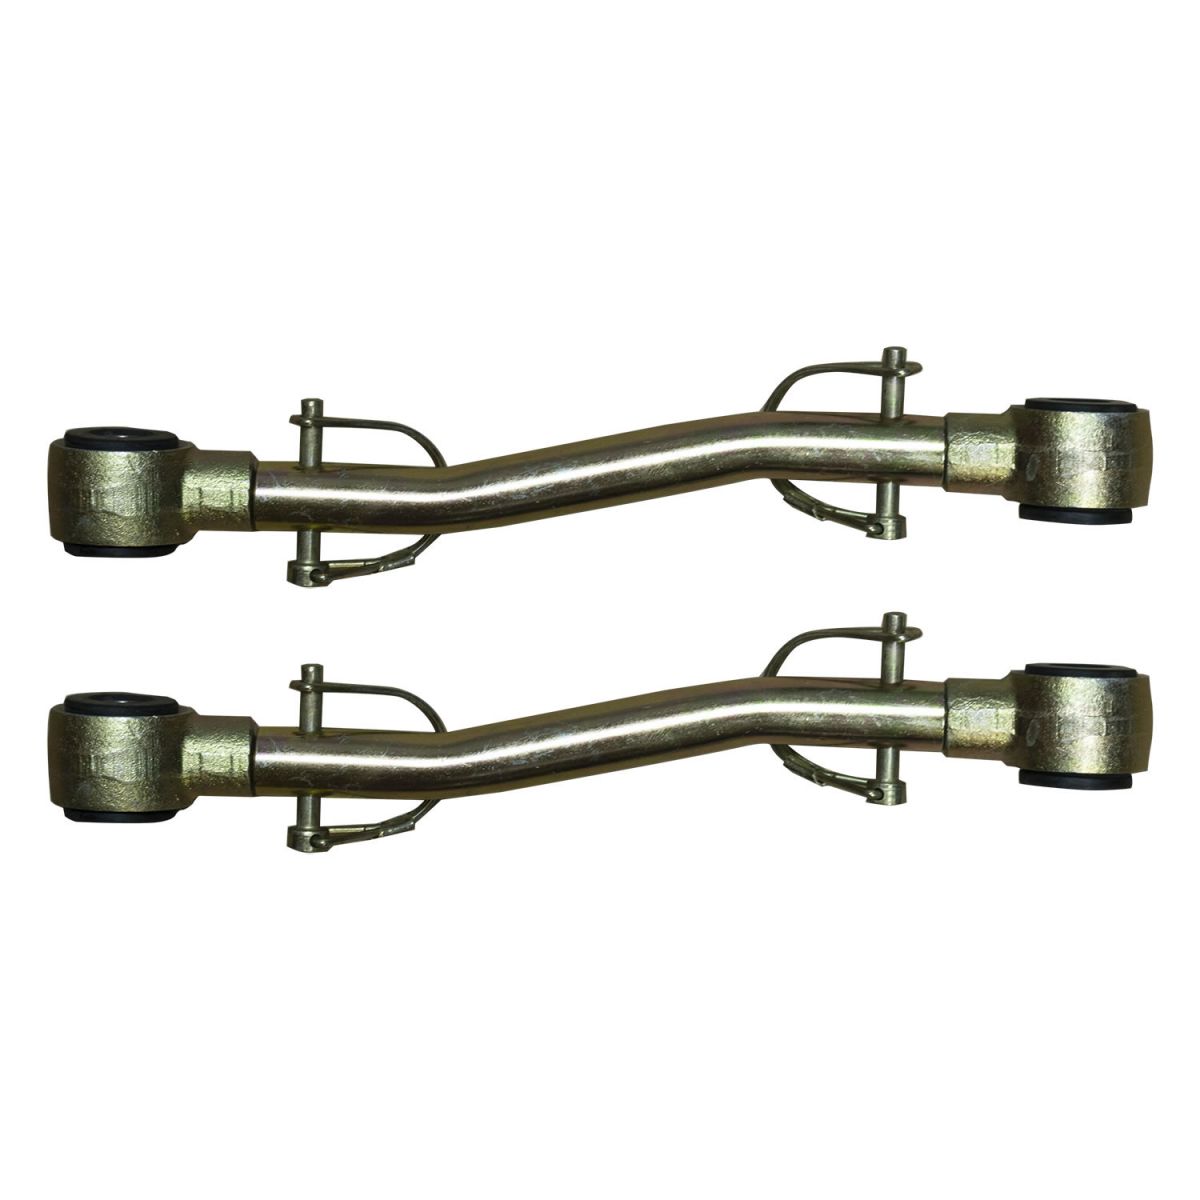 Skyjacker Suspension - Skyjacker Front Sway Bar Disconnect End Links For 18-20 Jeep Wrangler & Gladiator With 3.5-6" Lift